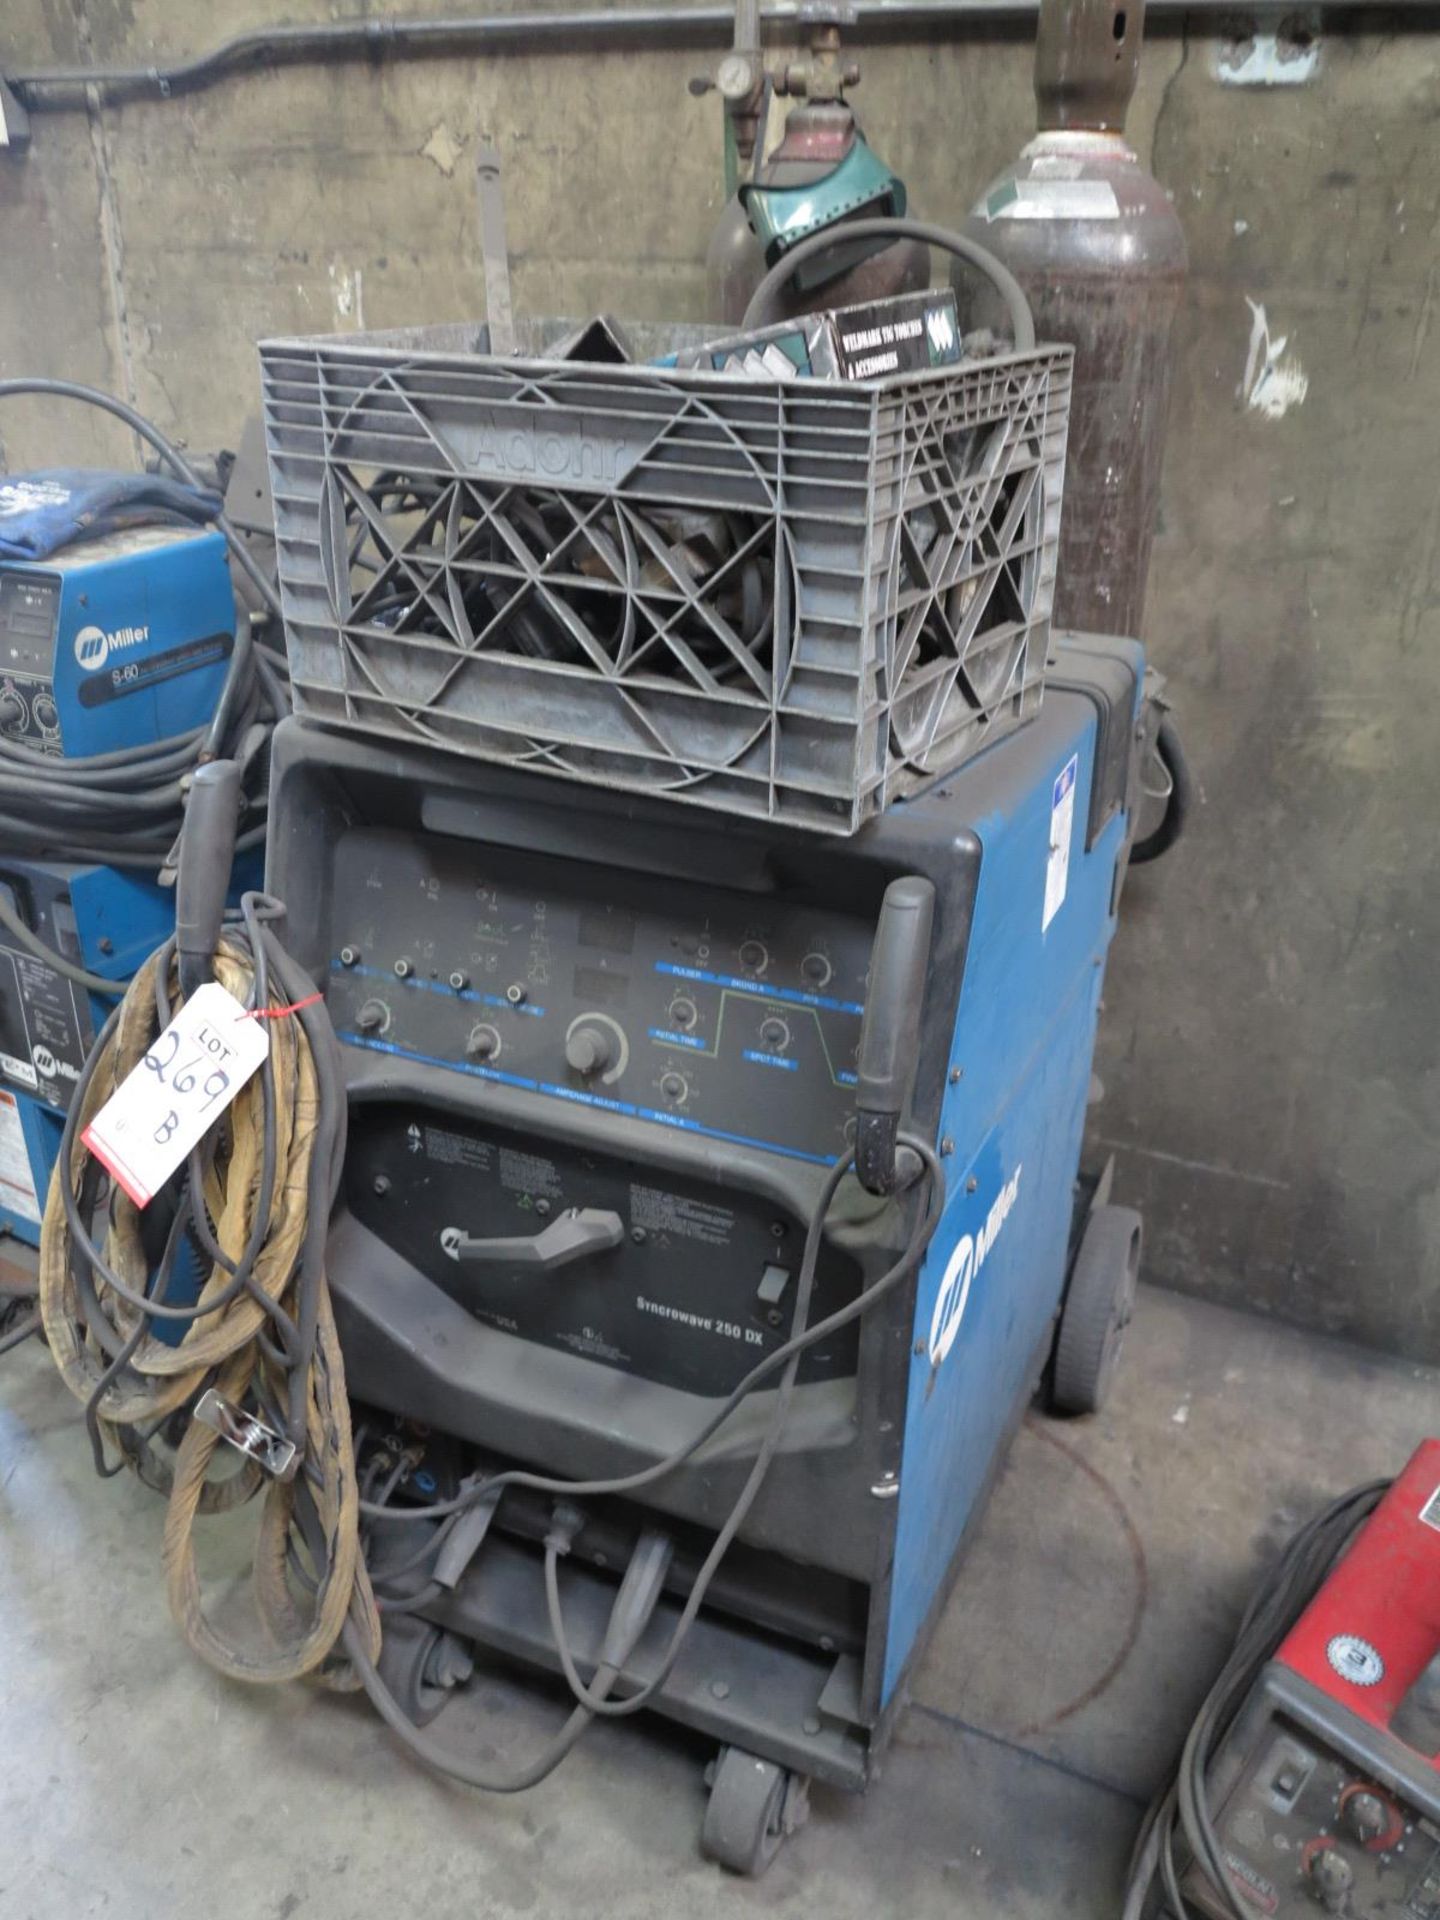 MILLER SYNCROWAVE 250DX WELDER, STOCK NO. 907194-02-1, S/N LE433764, TANKS NOT INCLUDED